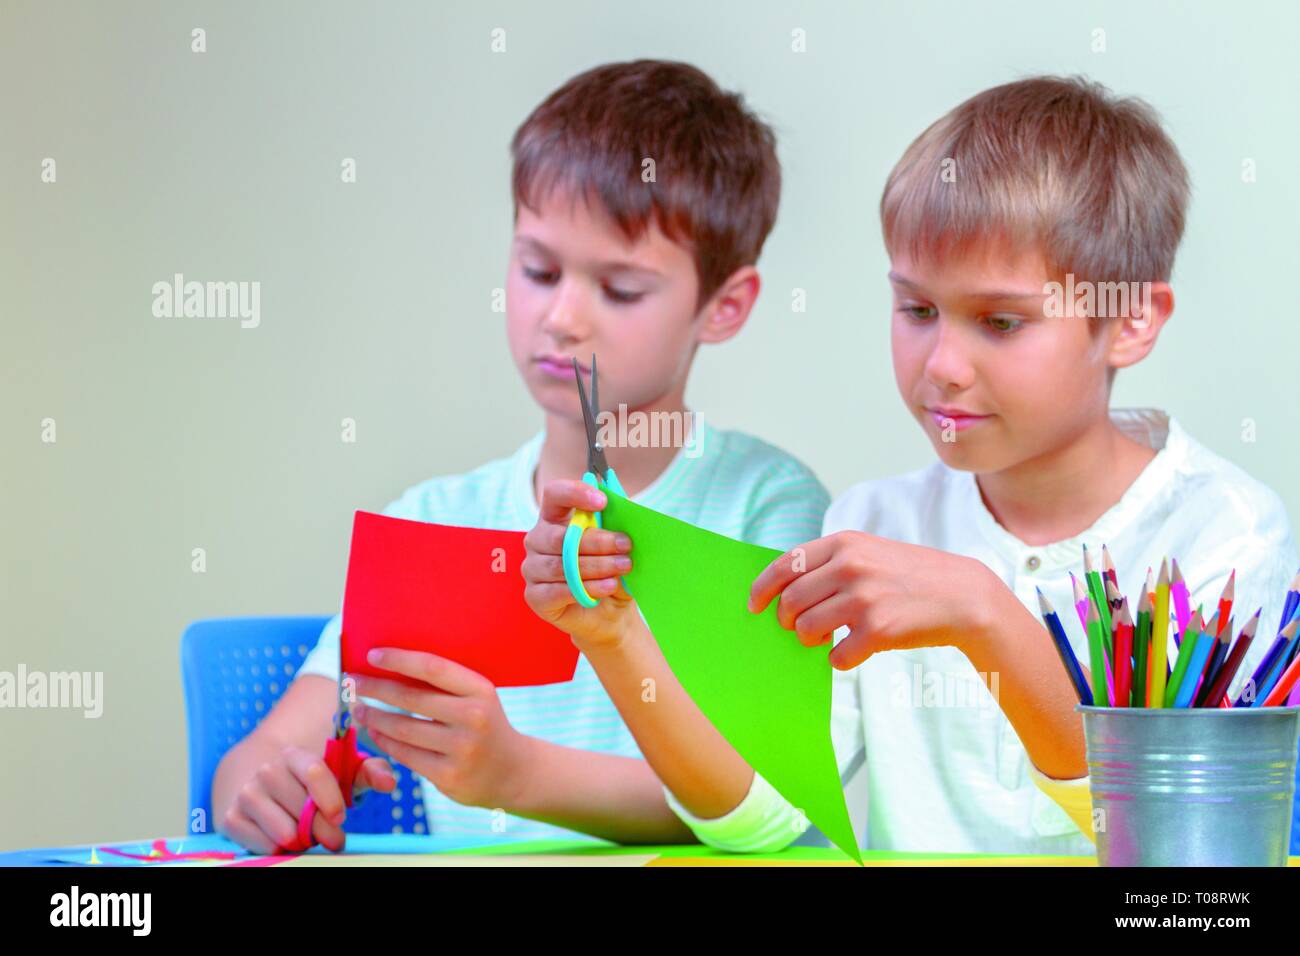 Children Cutting Colored Paper with Scissors at the Table Stock Photo -  Image of children, holding: 141799622